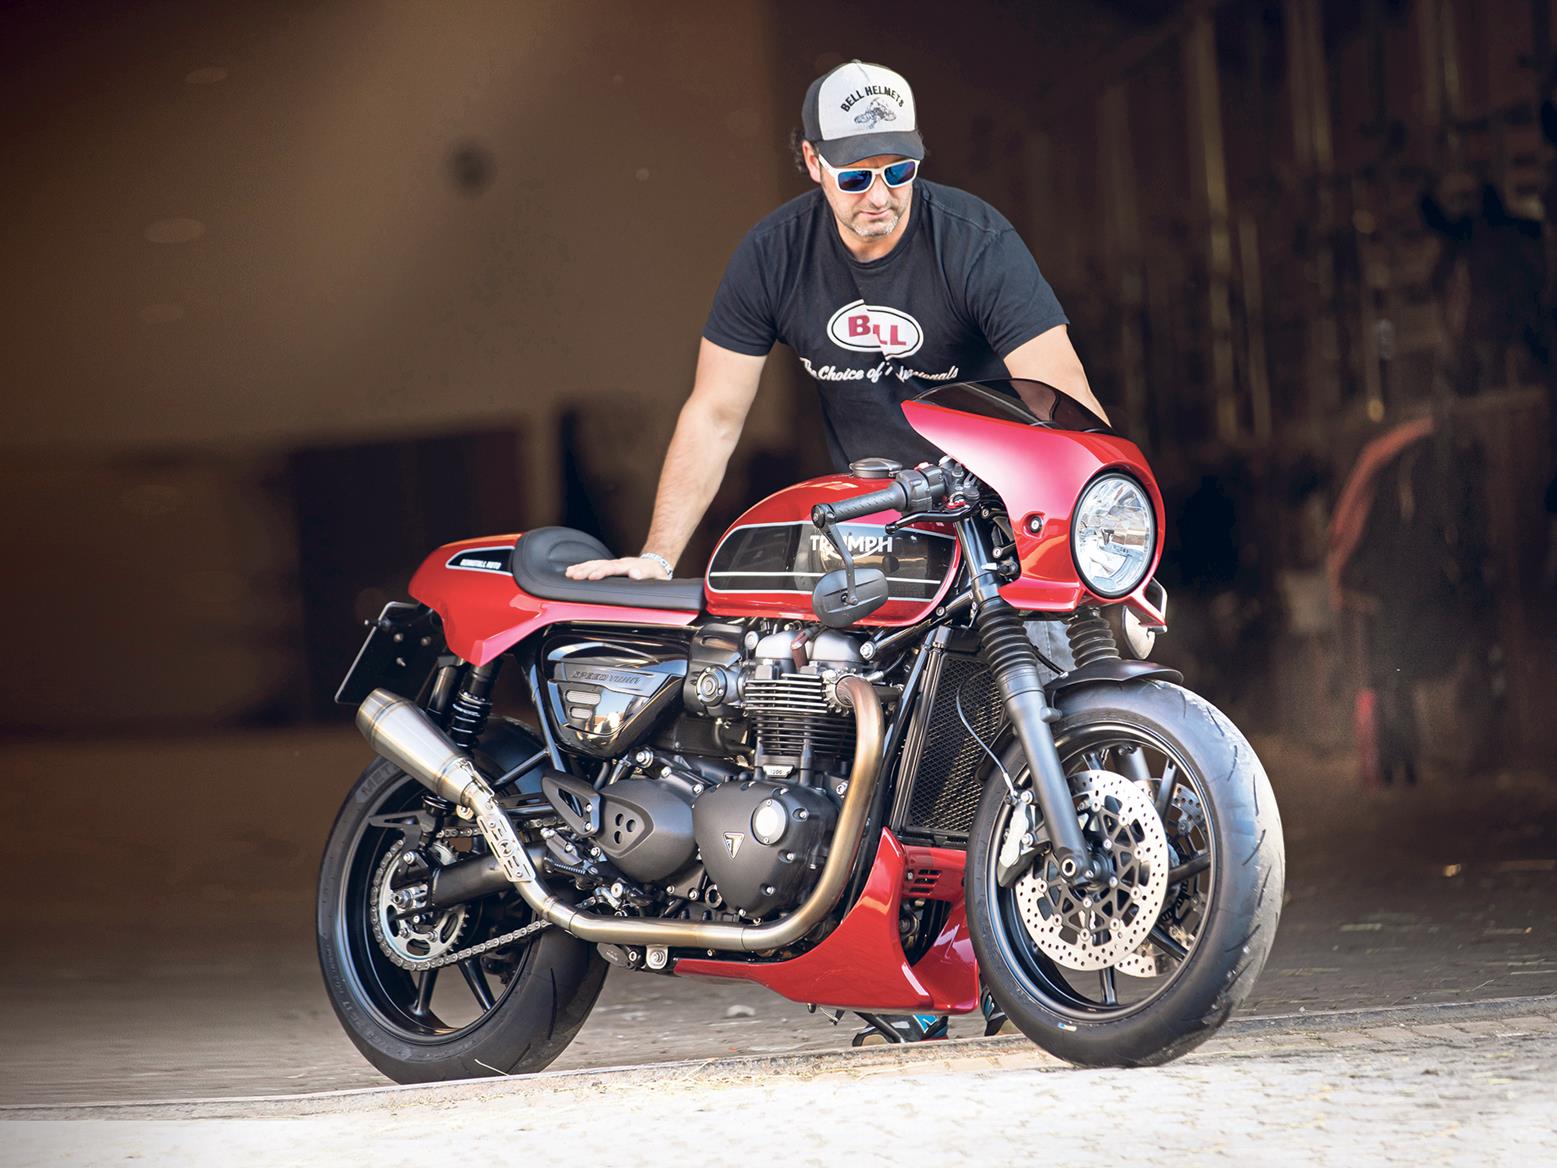 Triumph Speed Twin Café Racer kit helps turn roadster into speedster | MCN